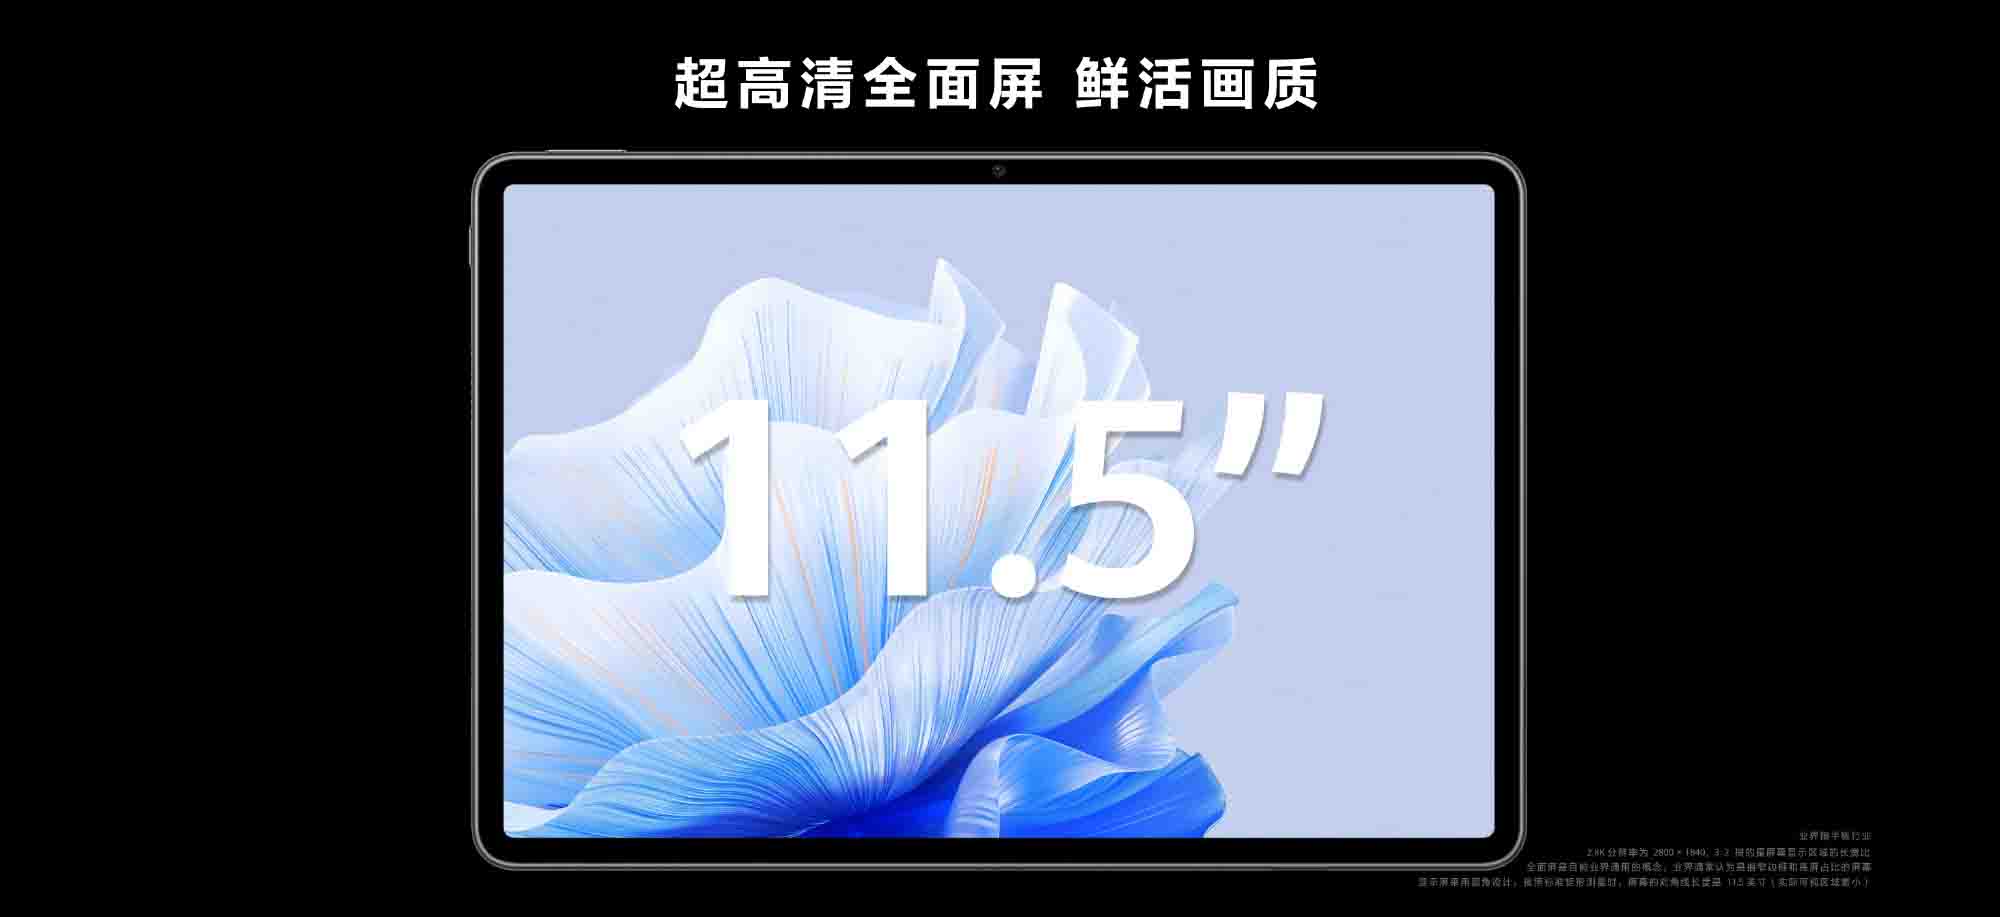 11.5 inch screen Huawei Matepad air launched